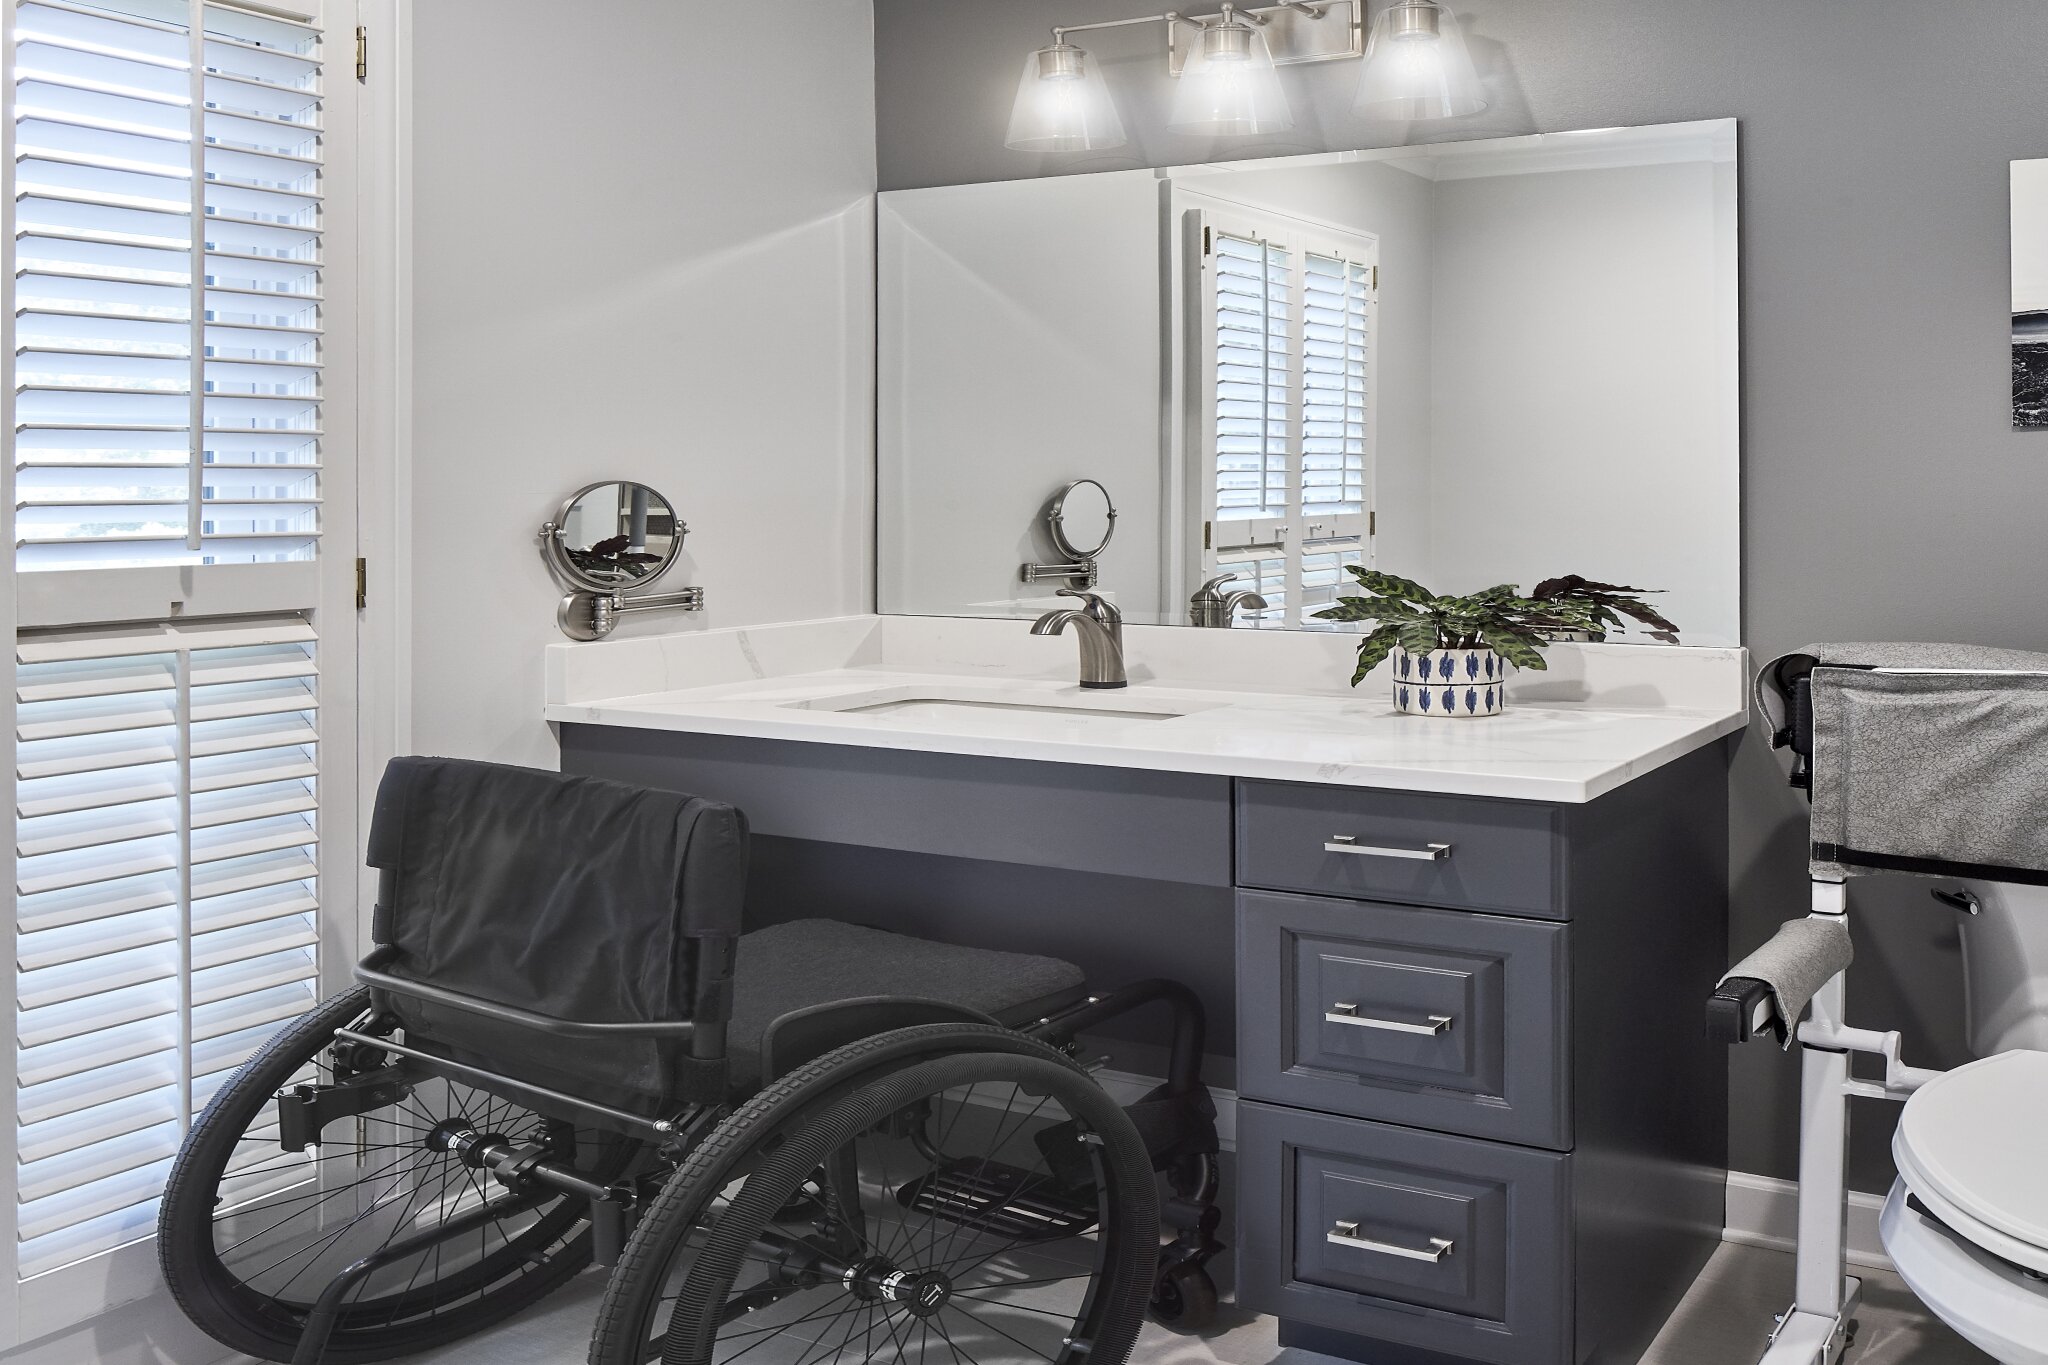 Universal design bathroom renovation with handicap-accessible floating vanity and oversized mirror